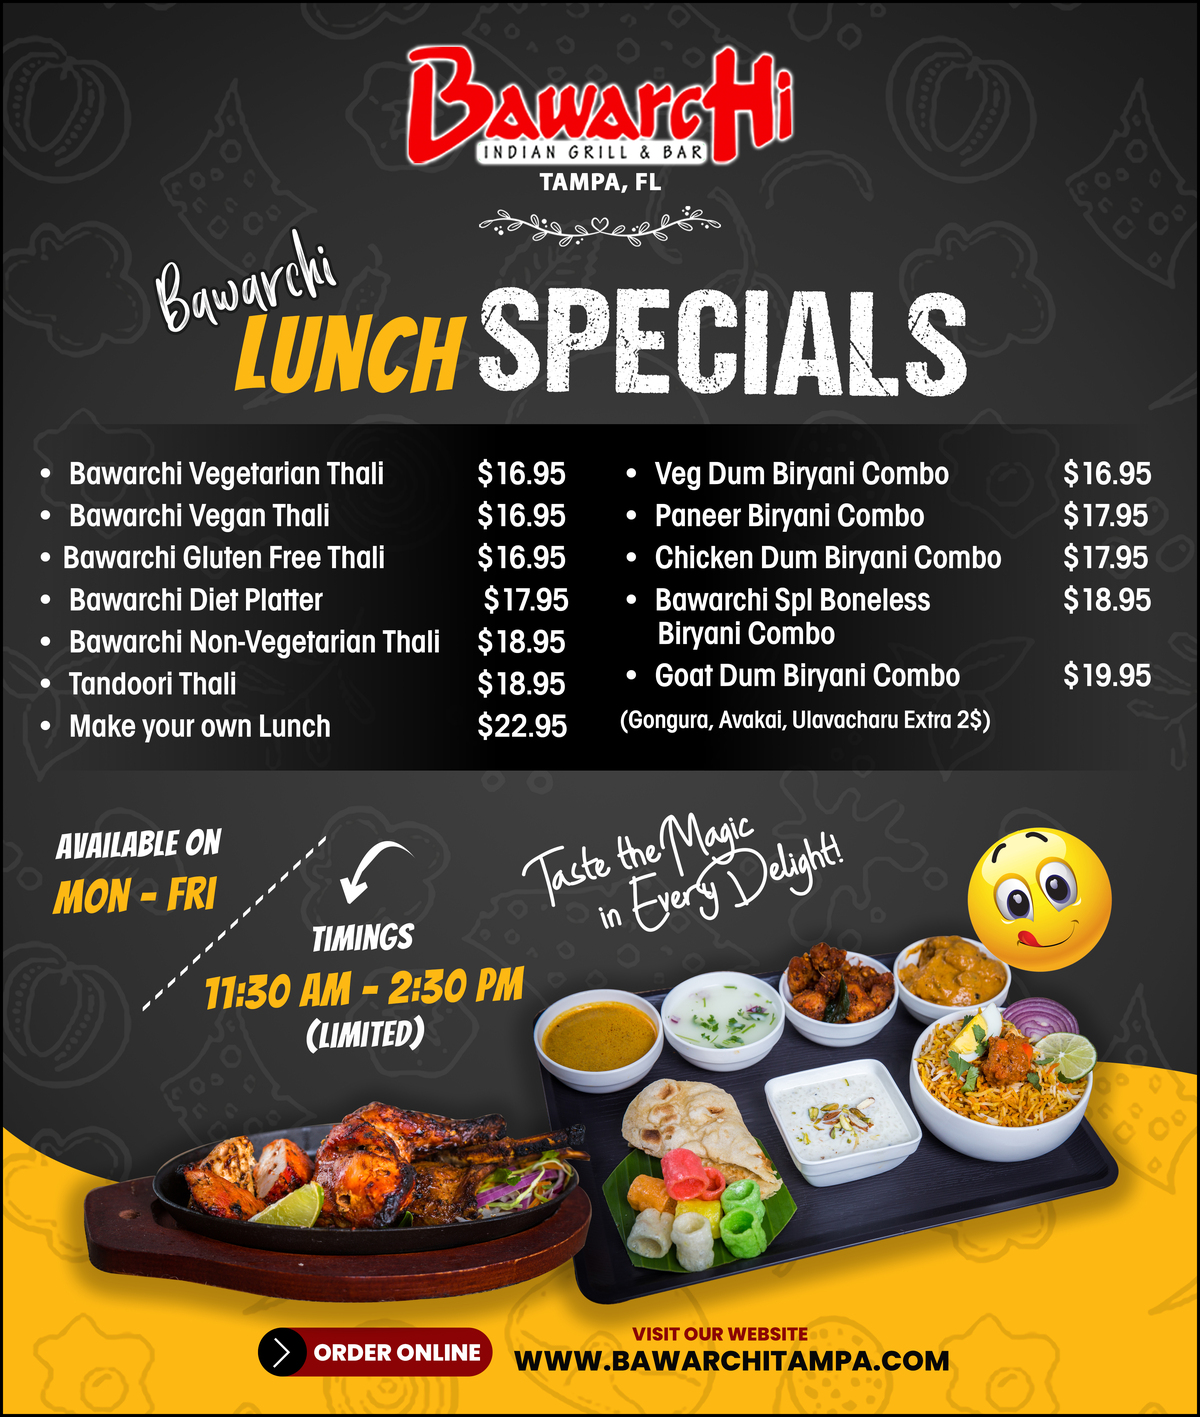 Bawarchi Lunch Specials